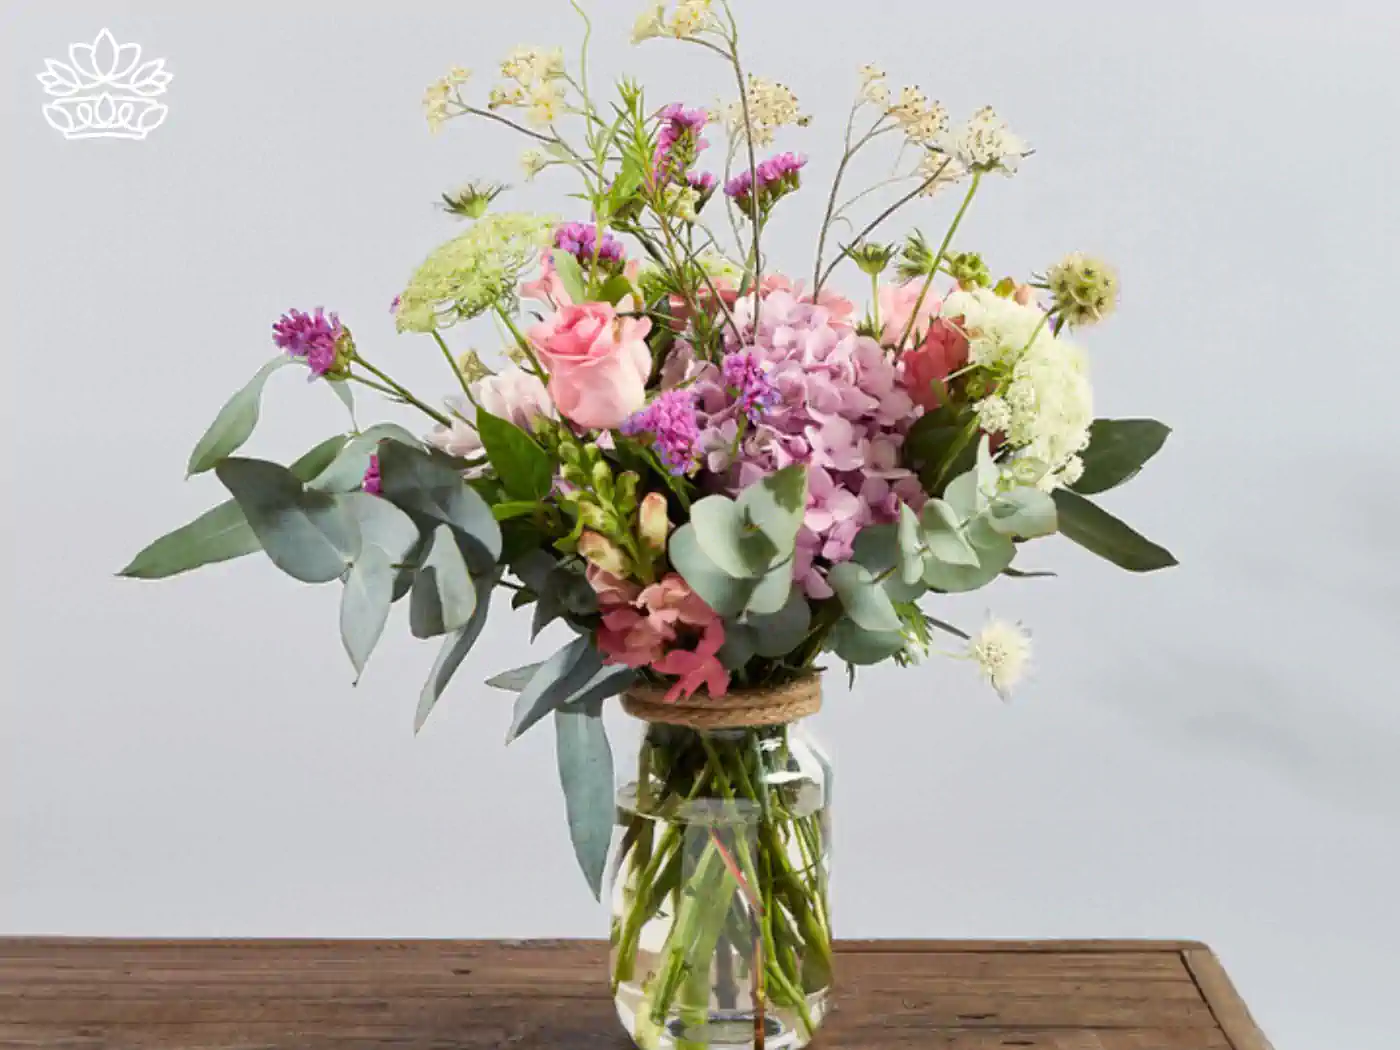 Elegant get well flower arrangement in a clear vase, featuring soft pink roses, lush hydrangeas, and delicate white blooms, accented with eucalyptus leaves. Delivered with Heart. Fabulous Flowers and Gifts.